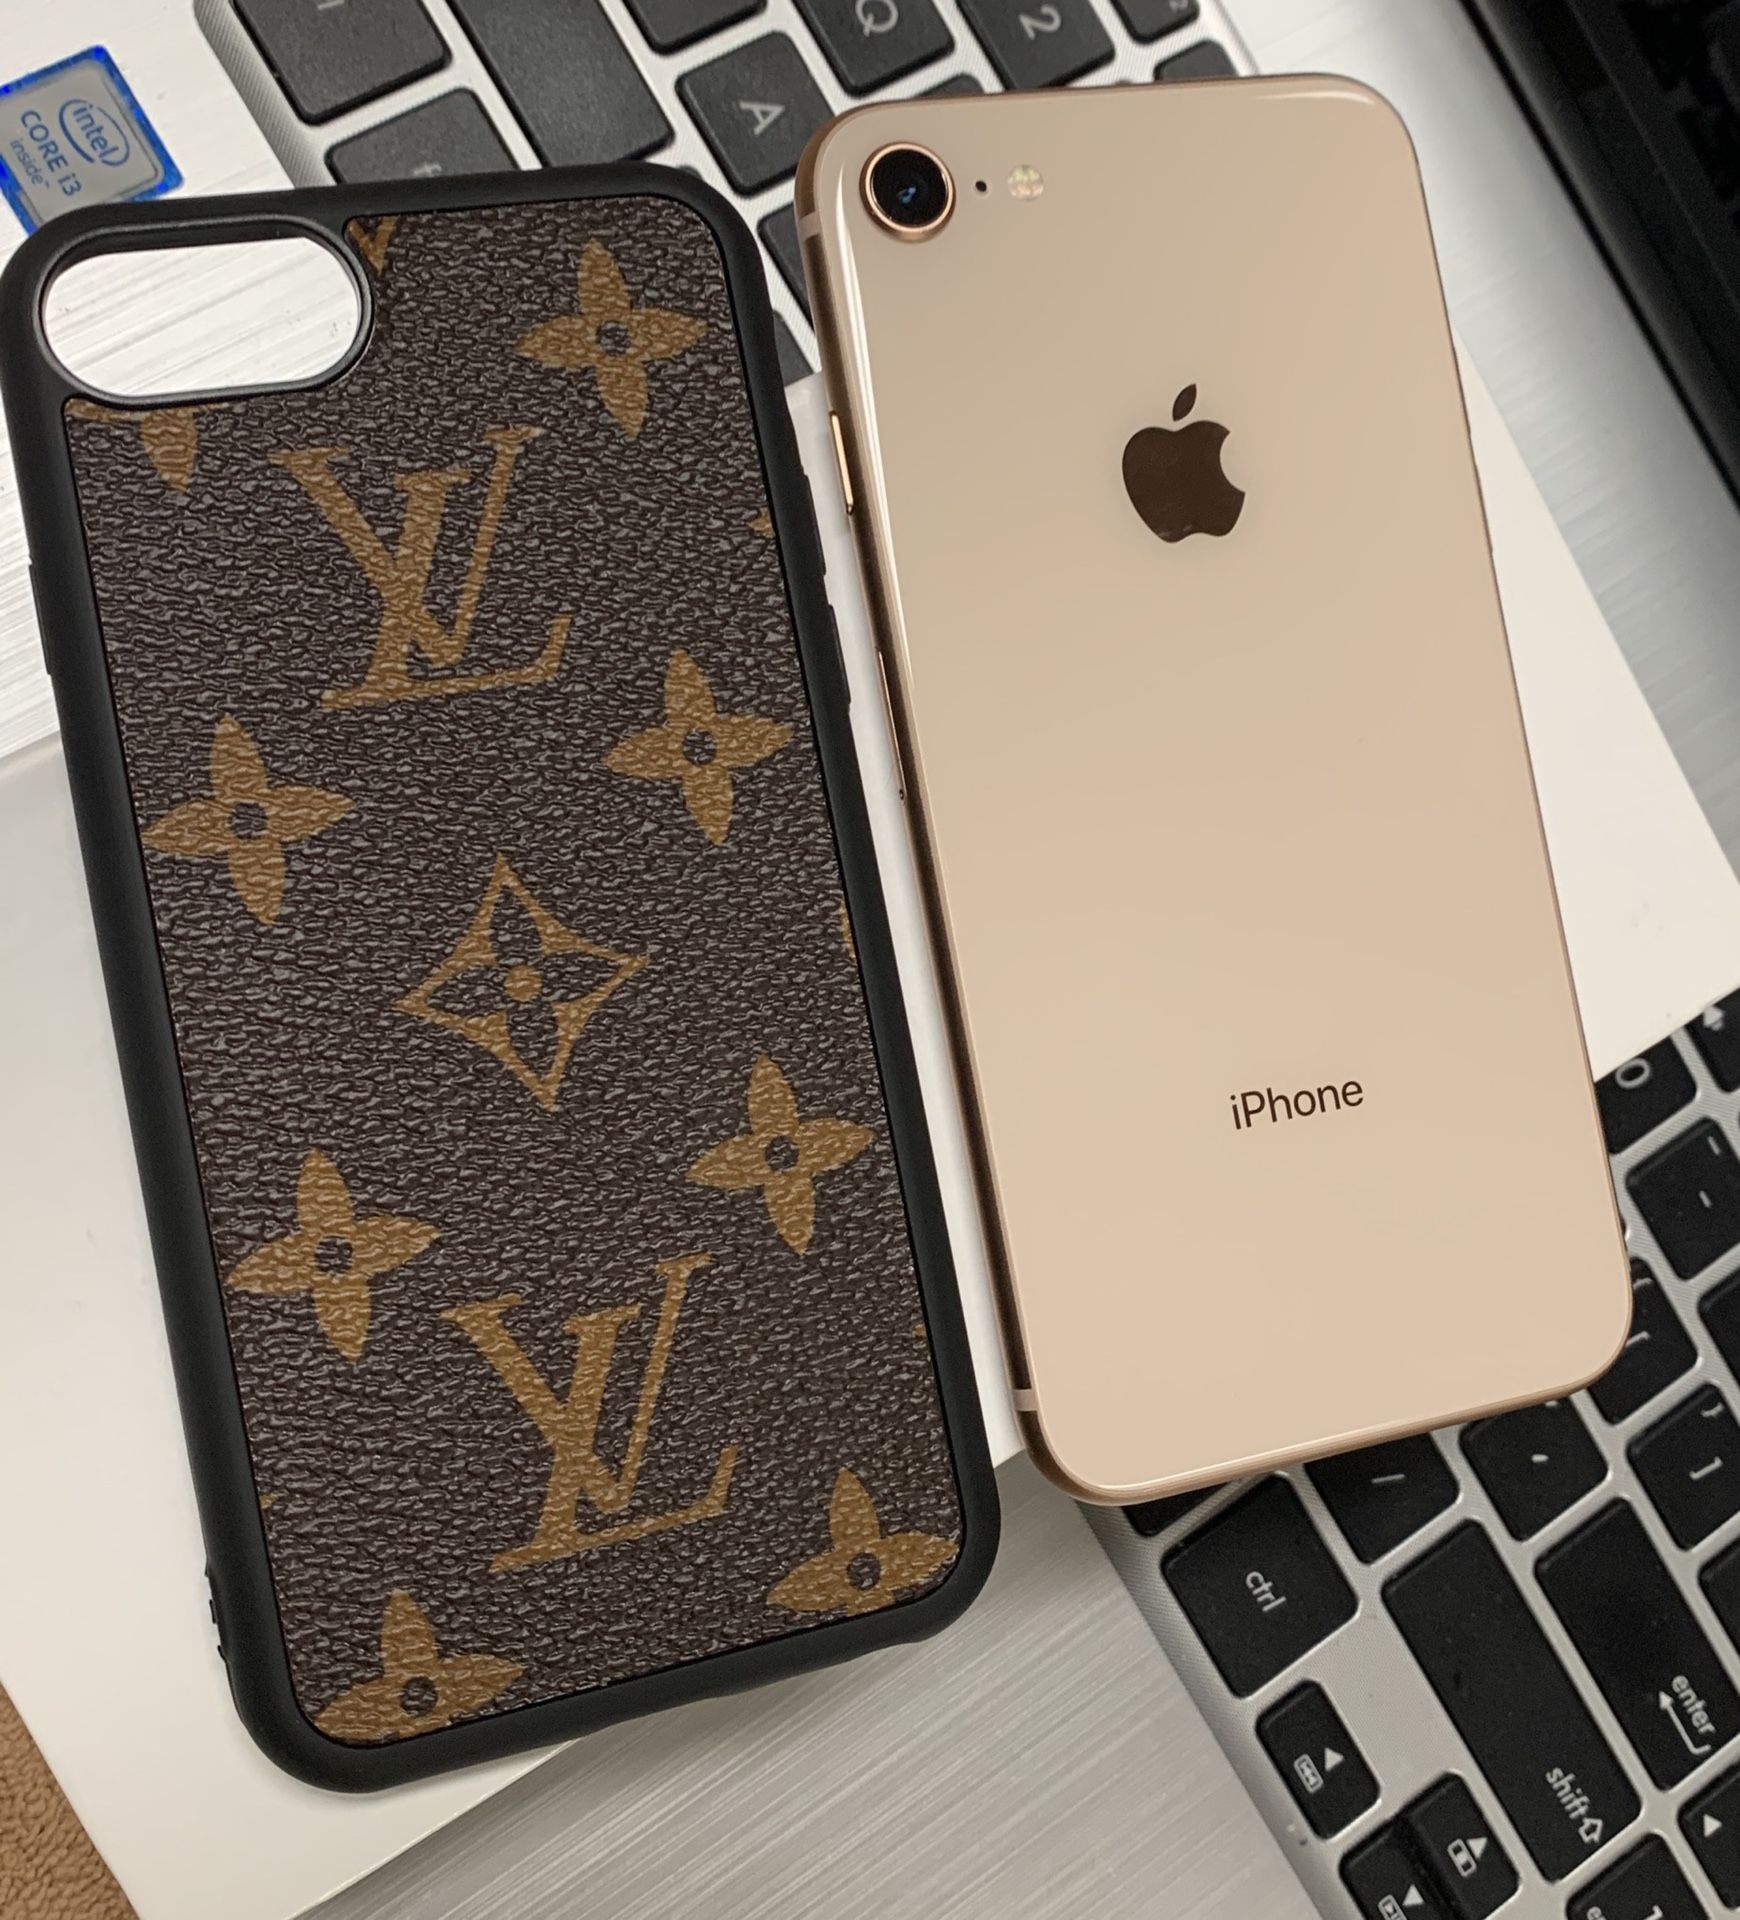 iPhone 8 with designer case and accessories